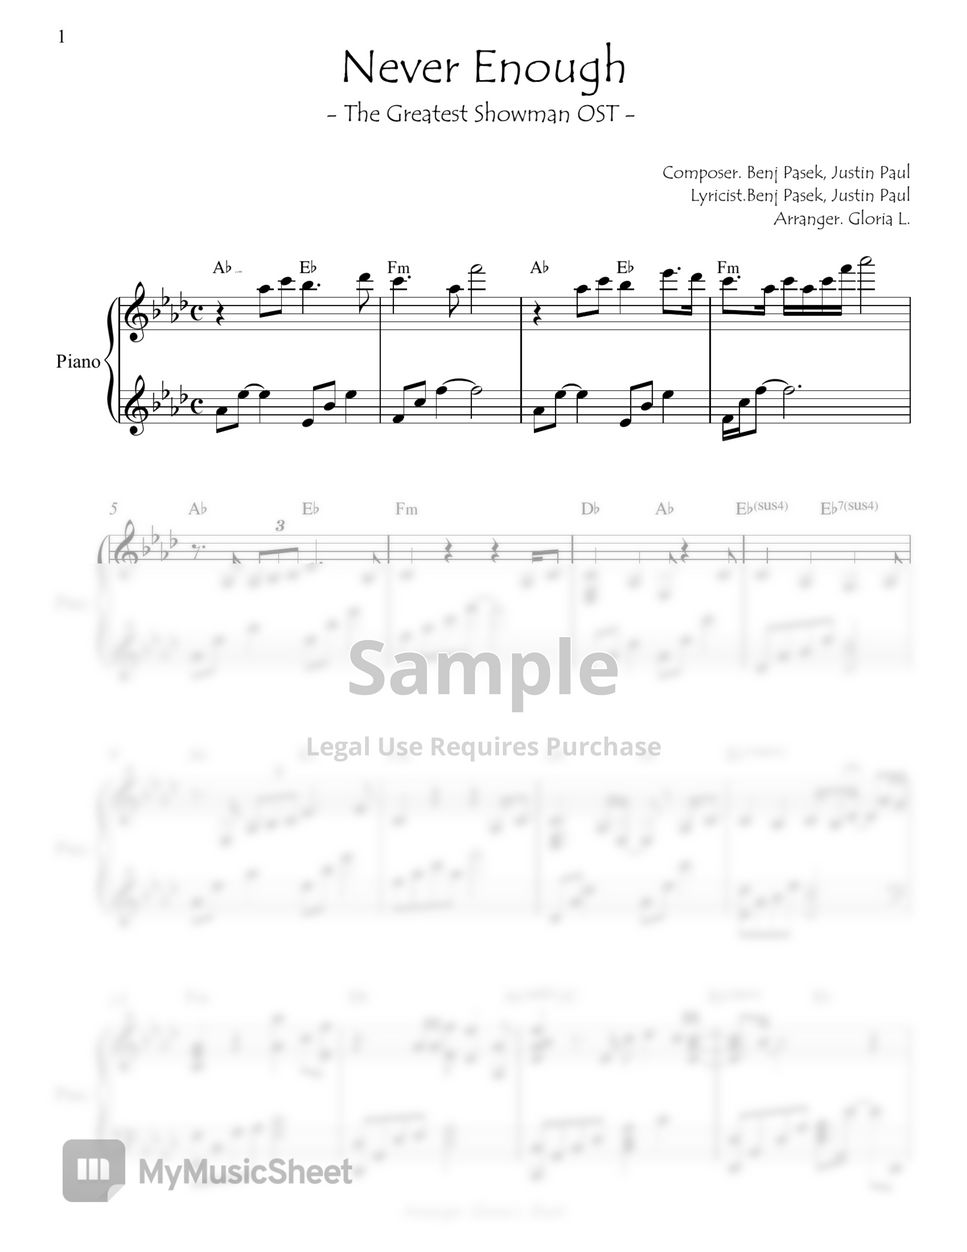 Loren Allred - Never Enough (The Greatest Showman OST) Piano Sheet  by. Gloria L.